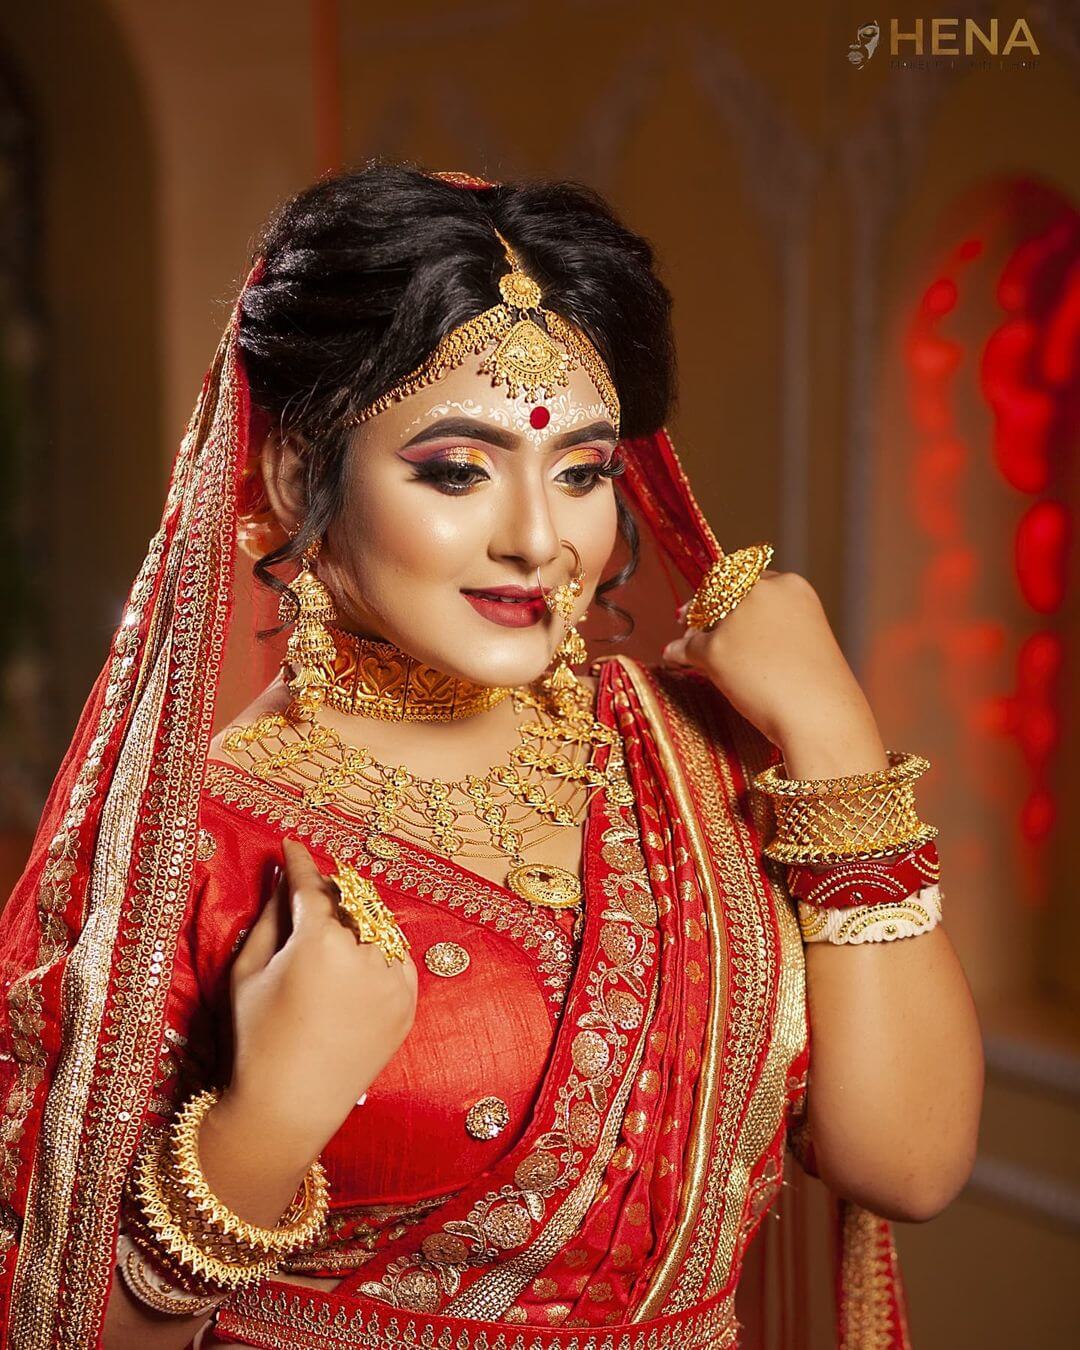 Another sparkly Bengali bridal jewellery set